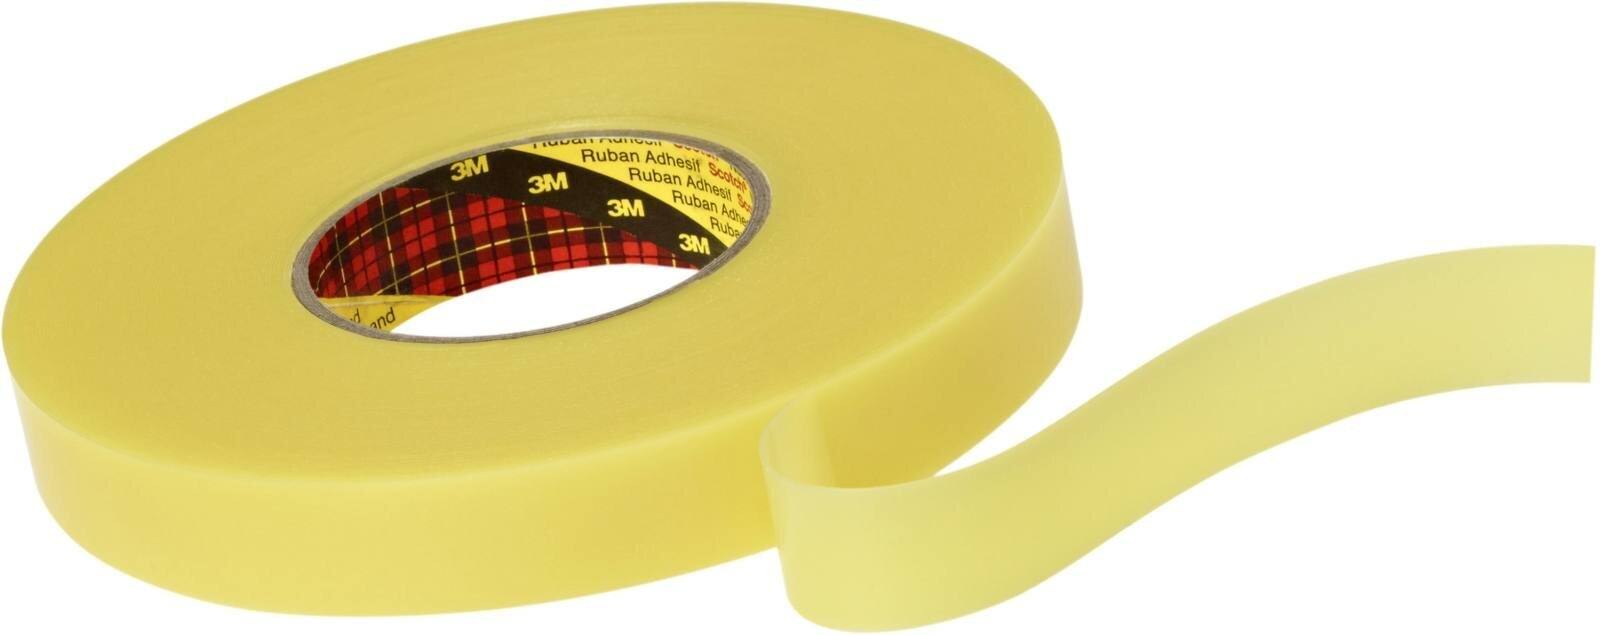 3M Double-sided removable adhesive tape 4656F, yellow, 12 mm x 33 m, 0.6 mm